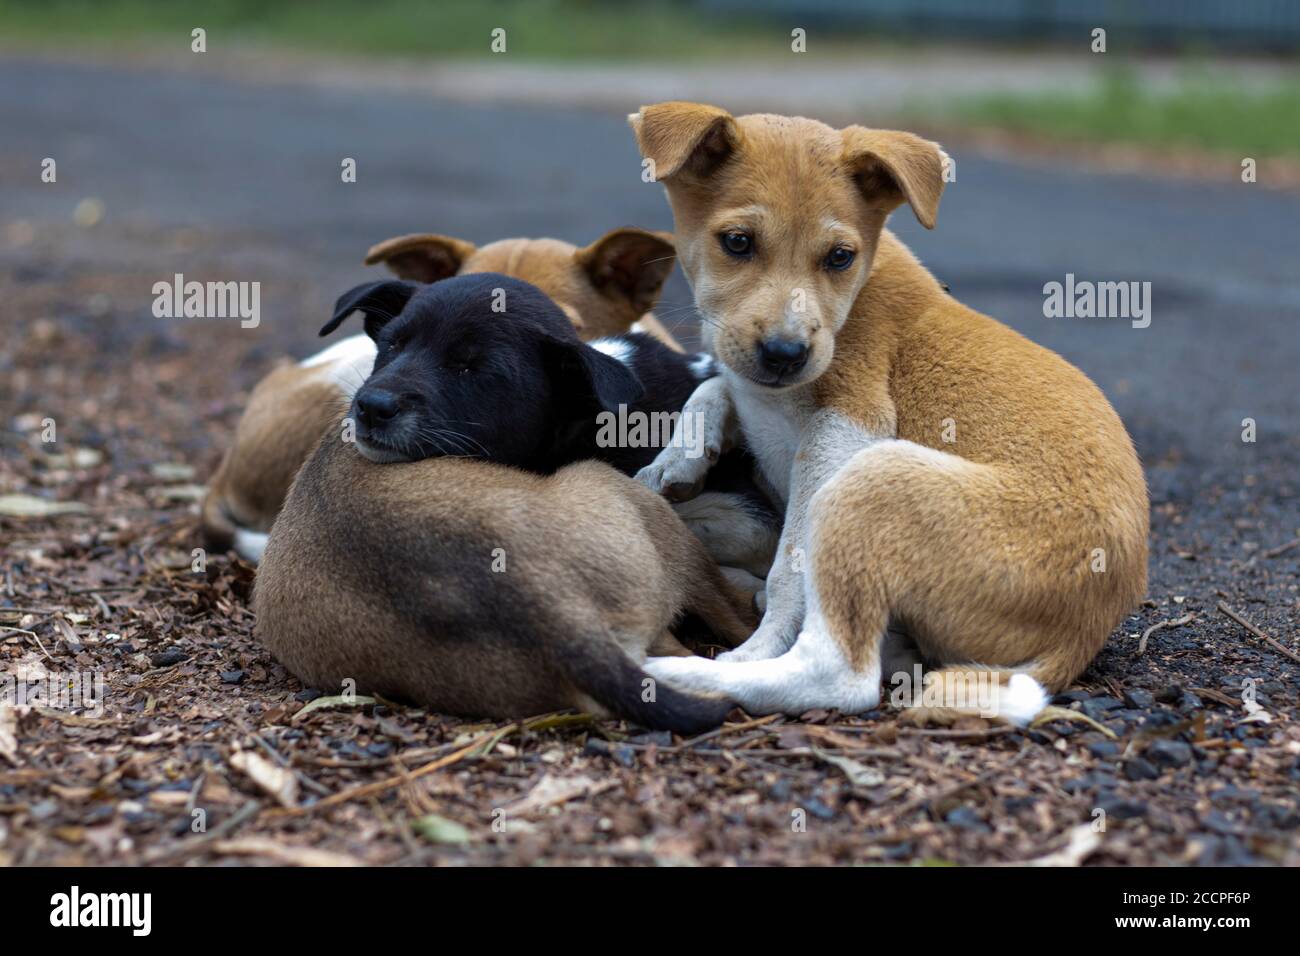 street puppies sleeping one over another in winter Stock Photo